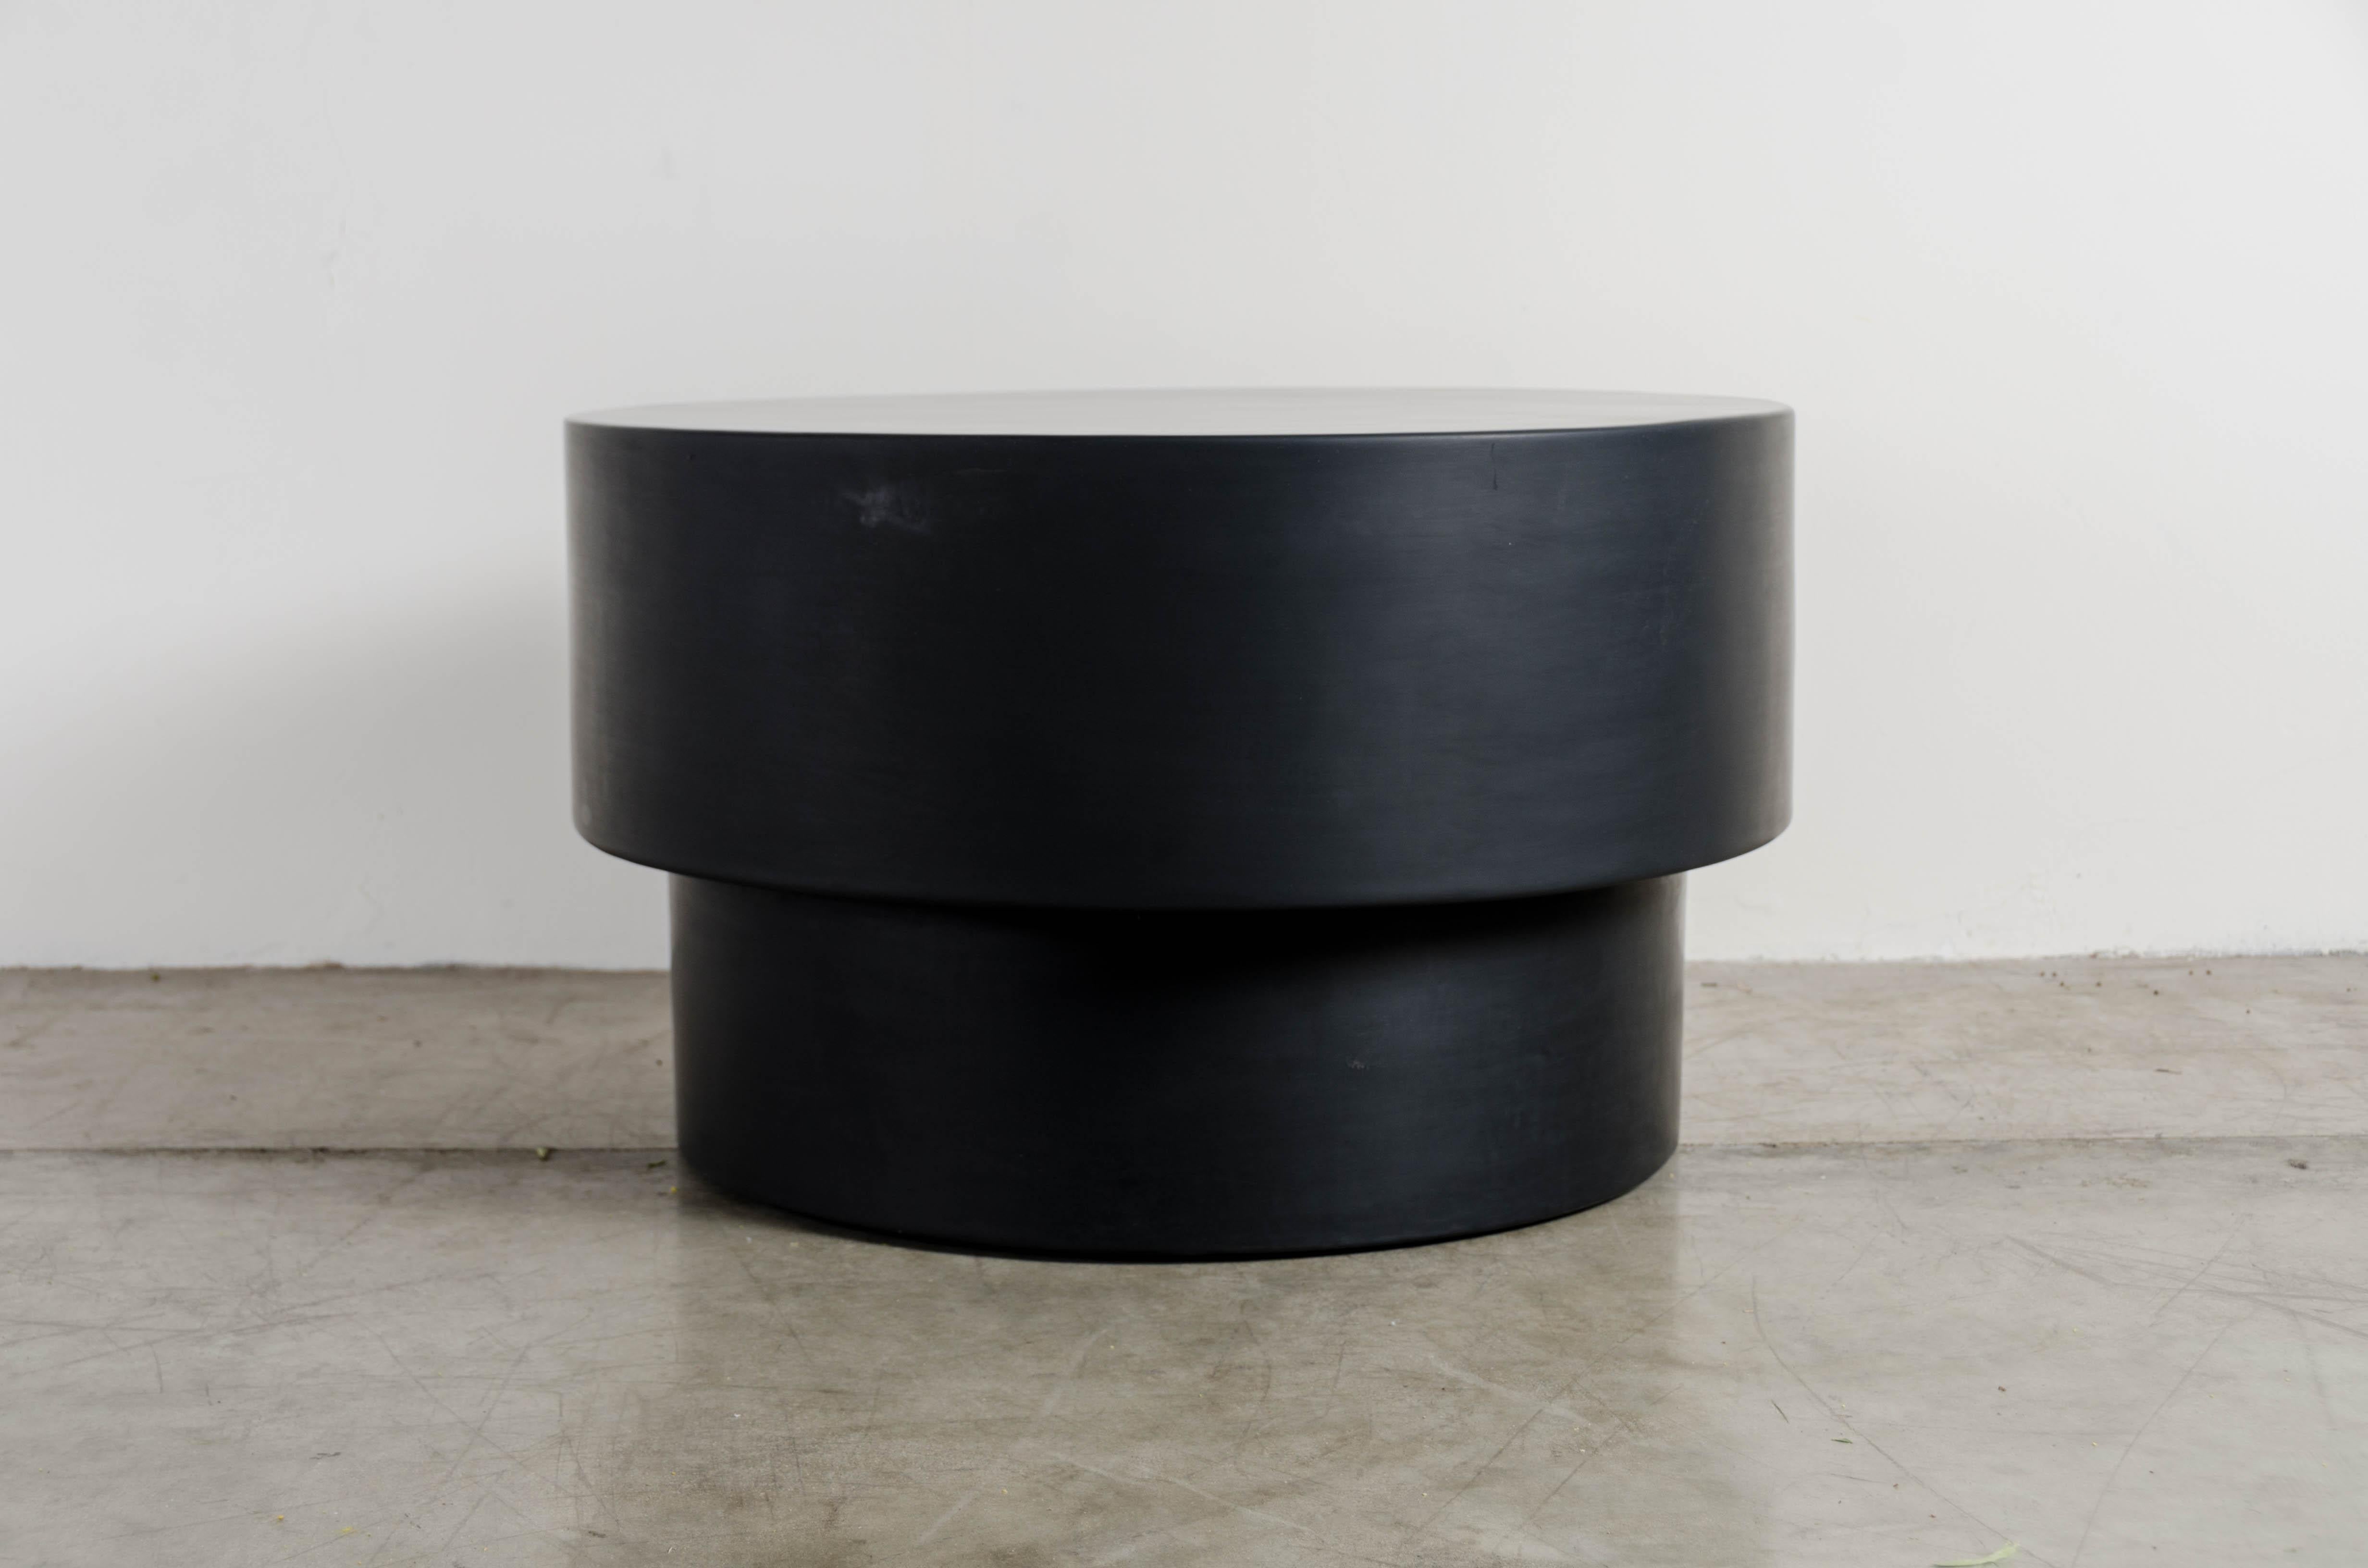 Drum table
Black lacquer
handmade
Hand repousse
Metal base
Limited Edition

Lacquer is a technique that dates back to the Shang dynasty, circa 1600-1100 B.C. These pieces are made with at least 60 coats of organic lacquer. Each layer of